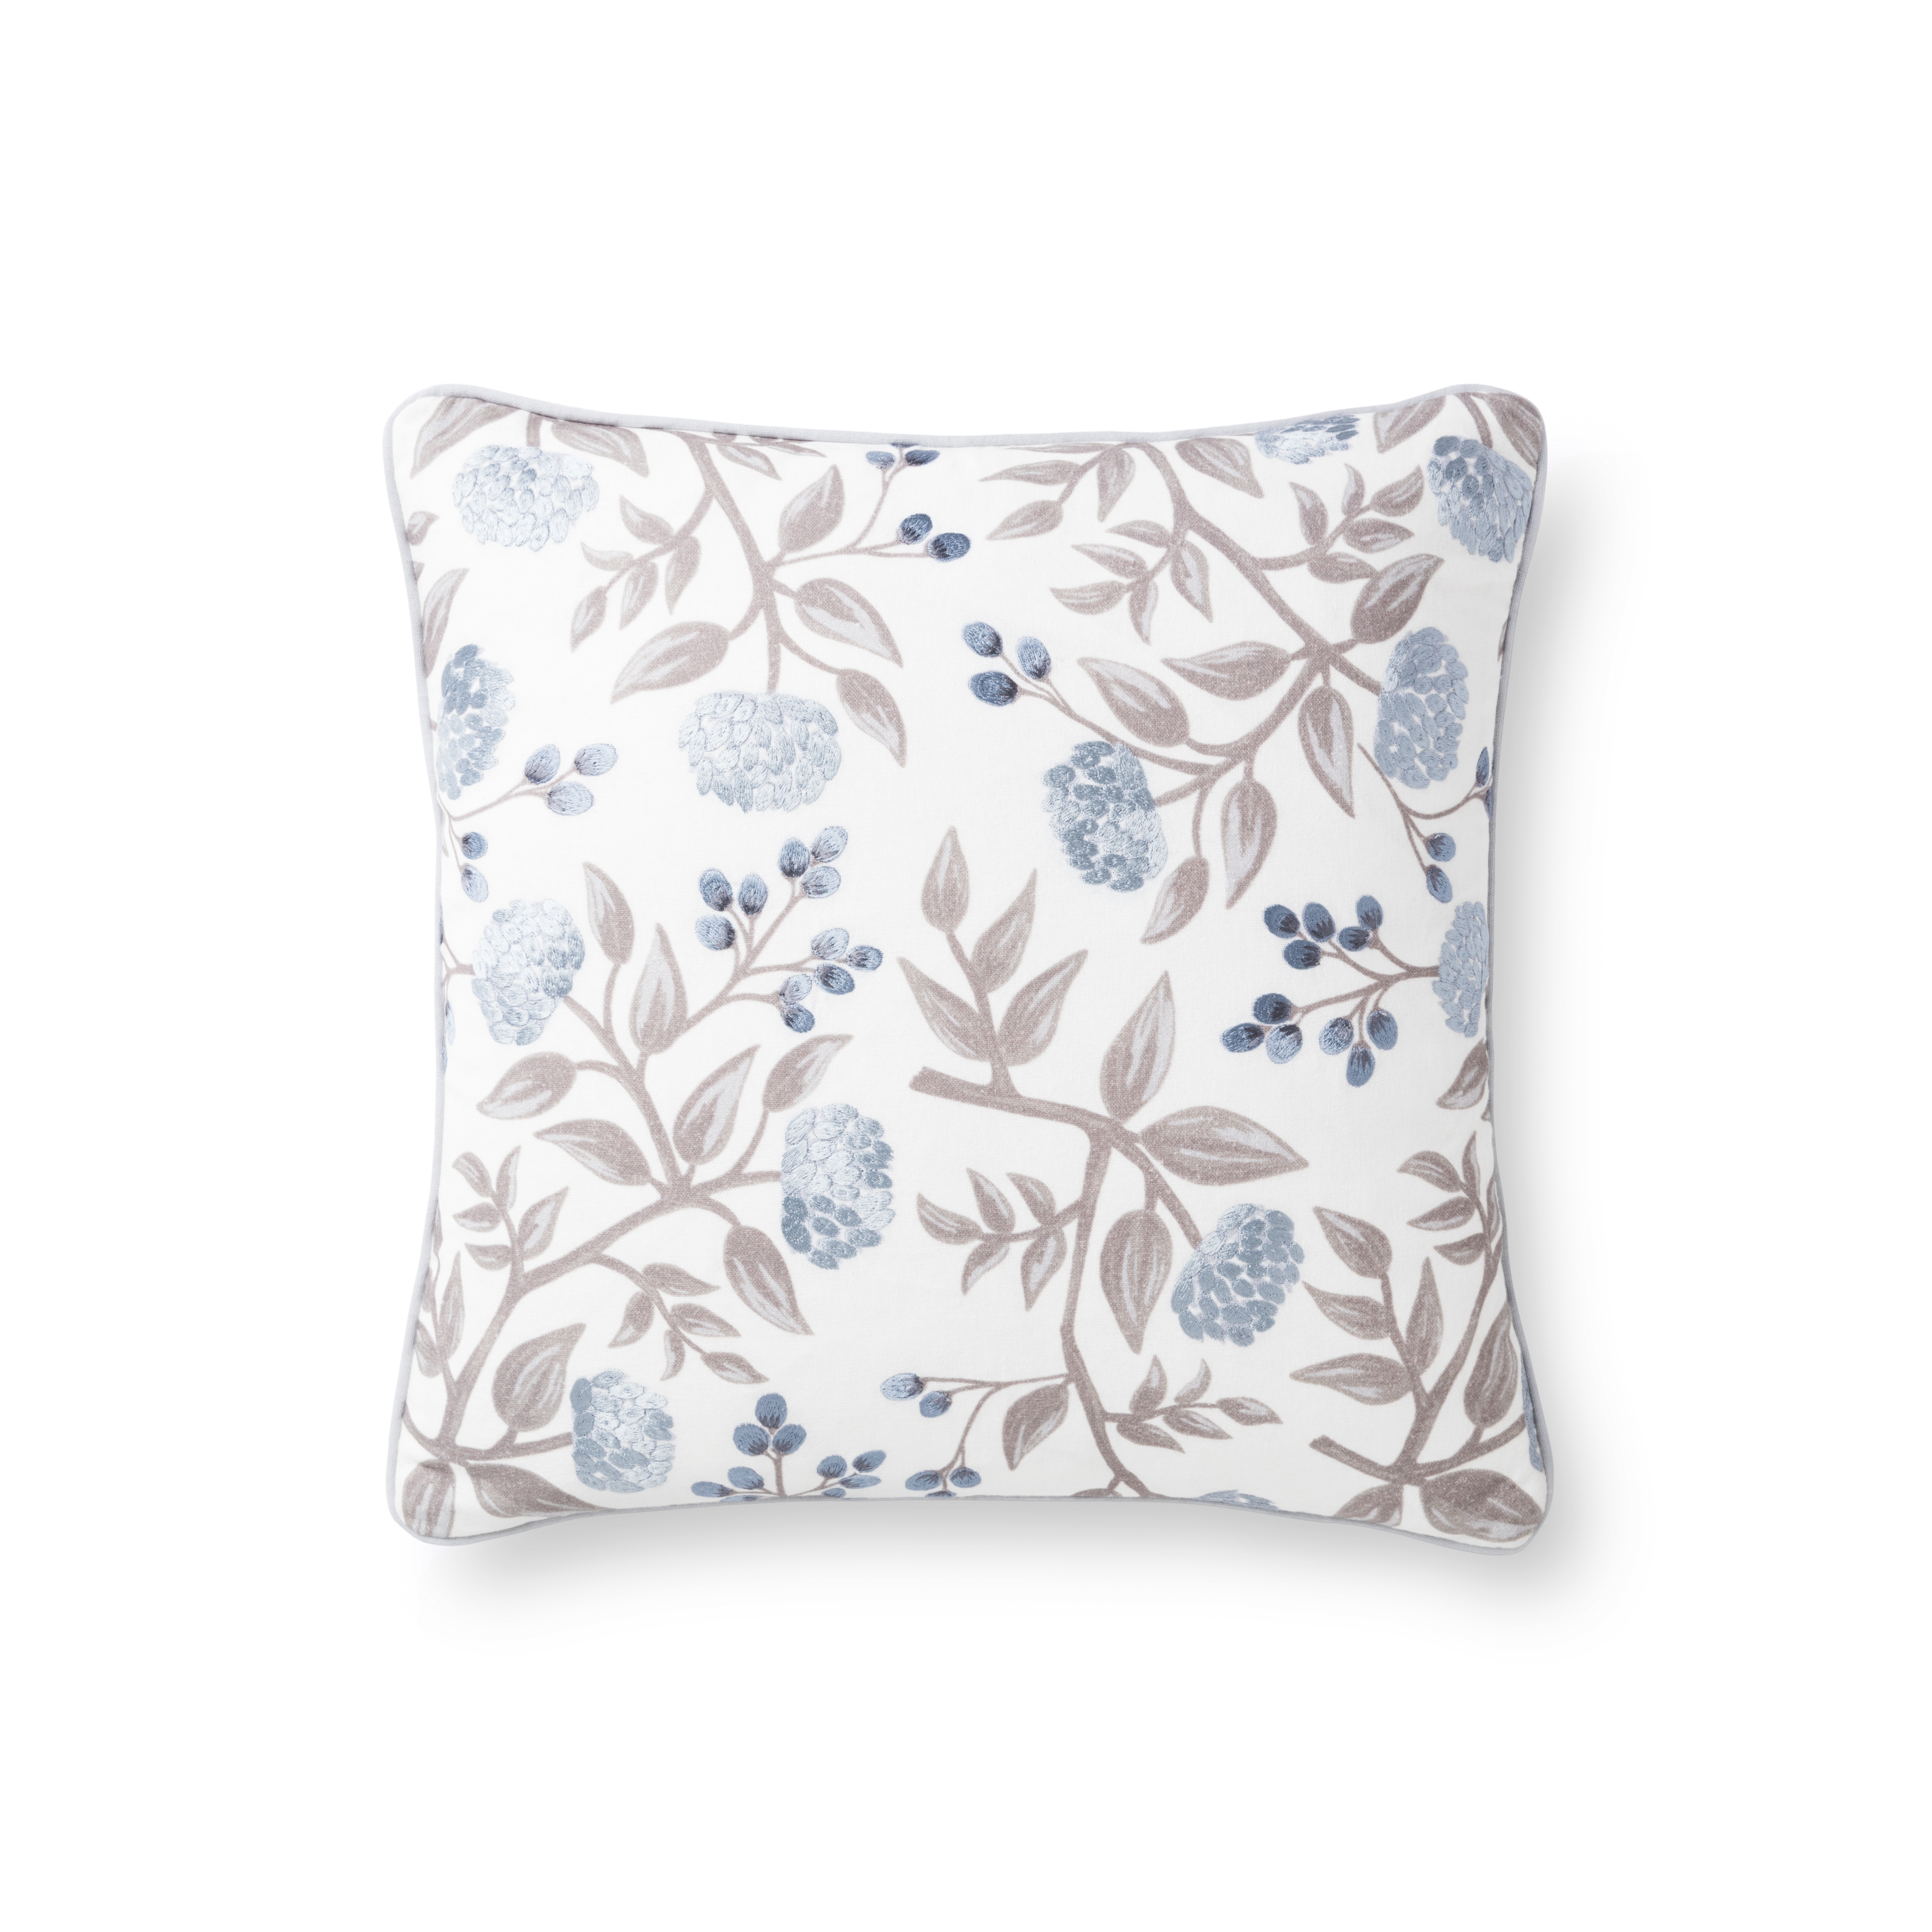 Rifle Paper Co. x Loloi PILLOWS P6049 IVORY / BLUE 18" x 18" Cover Only - Image 0